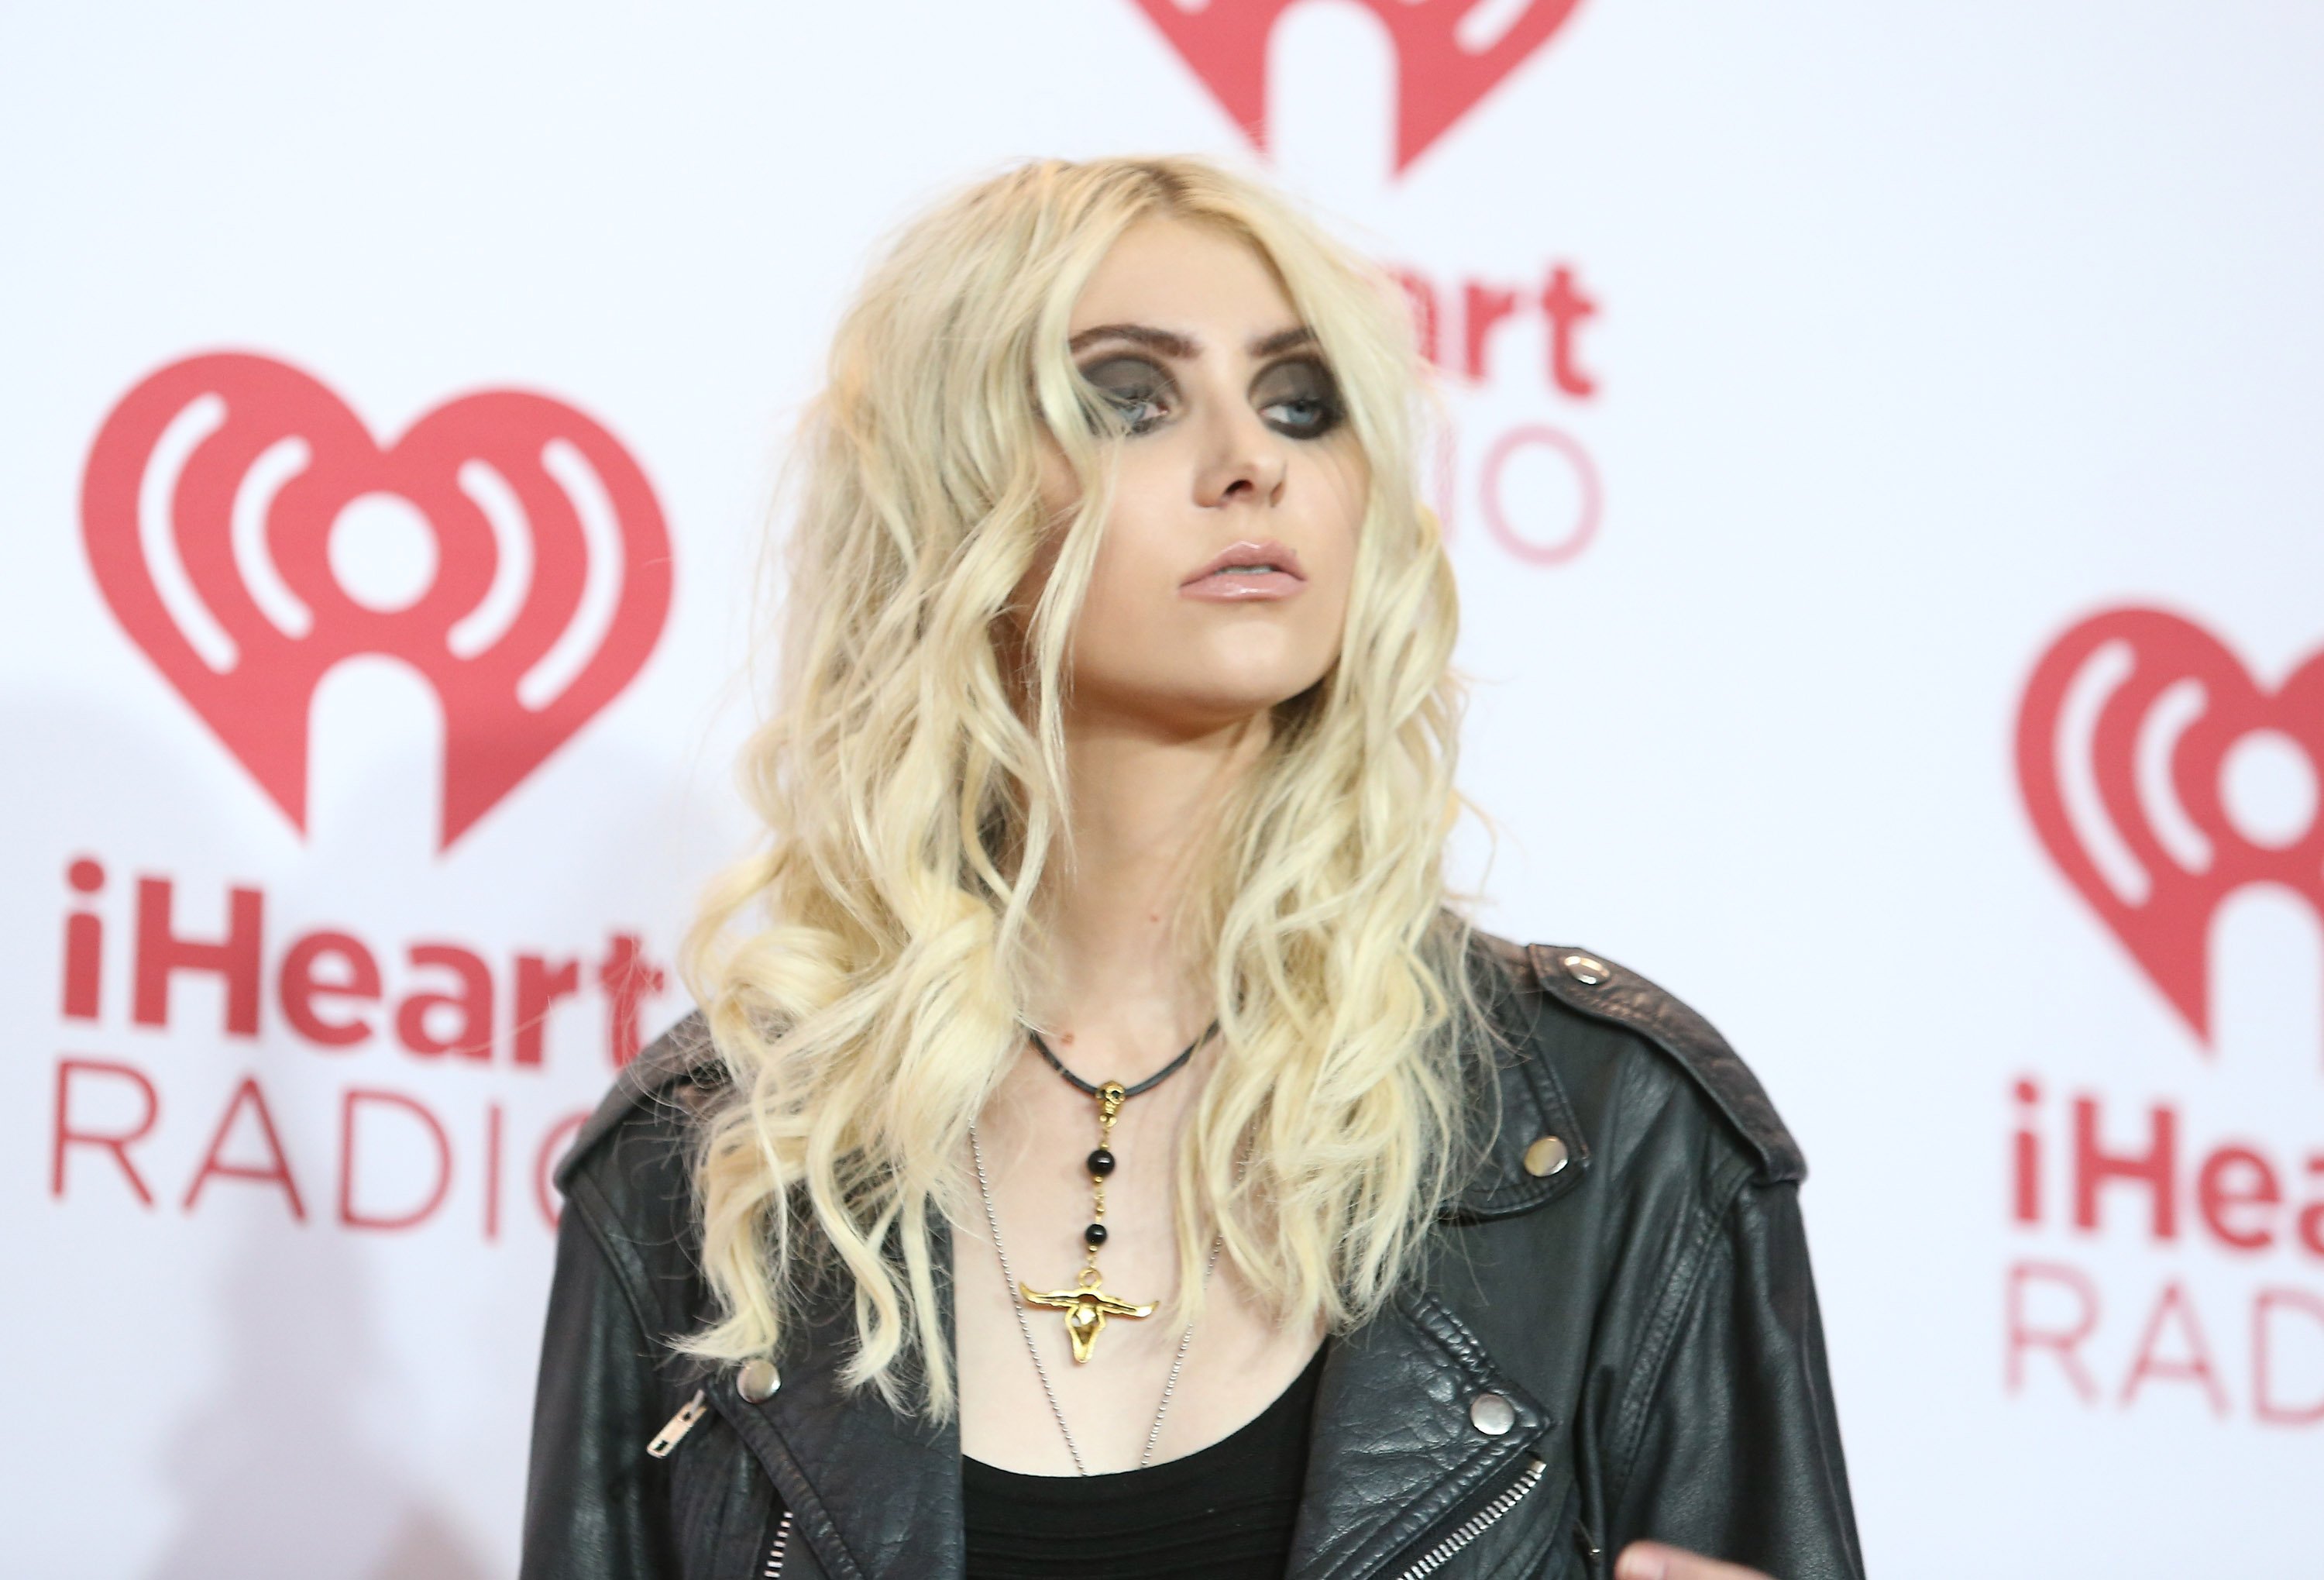 Taylor Momsen attends the iHeart Radio Music Festival on September 19, 2014 in Las Vegas, Nevada. |Photo: Getty Images